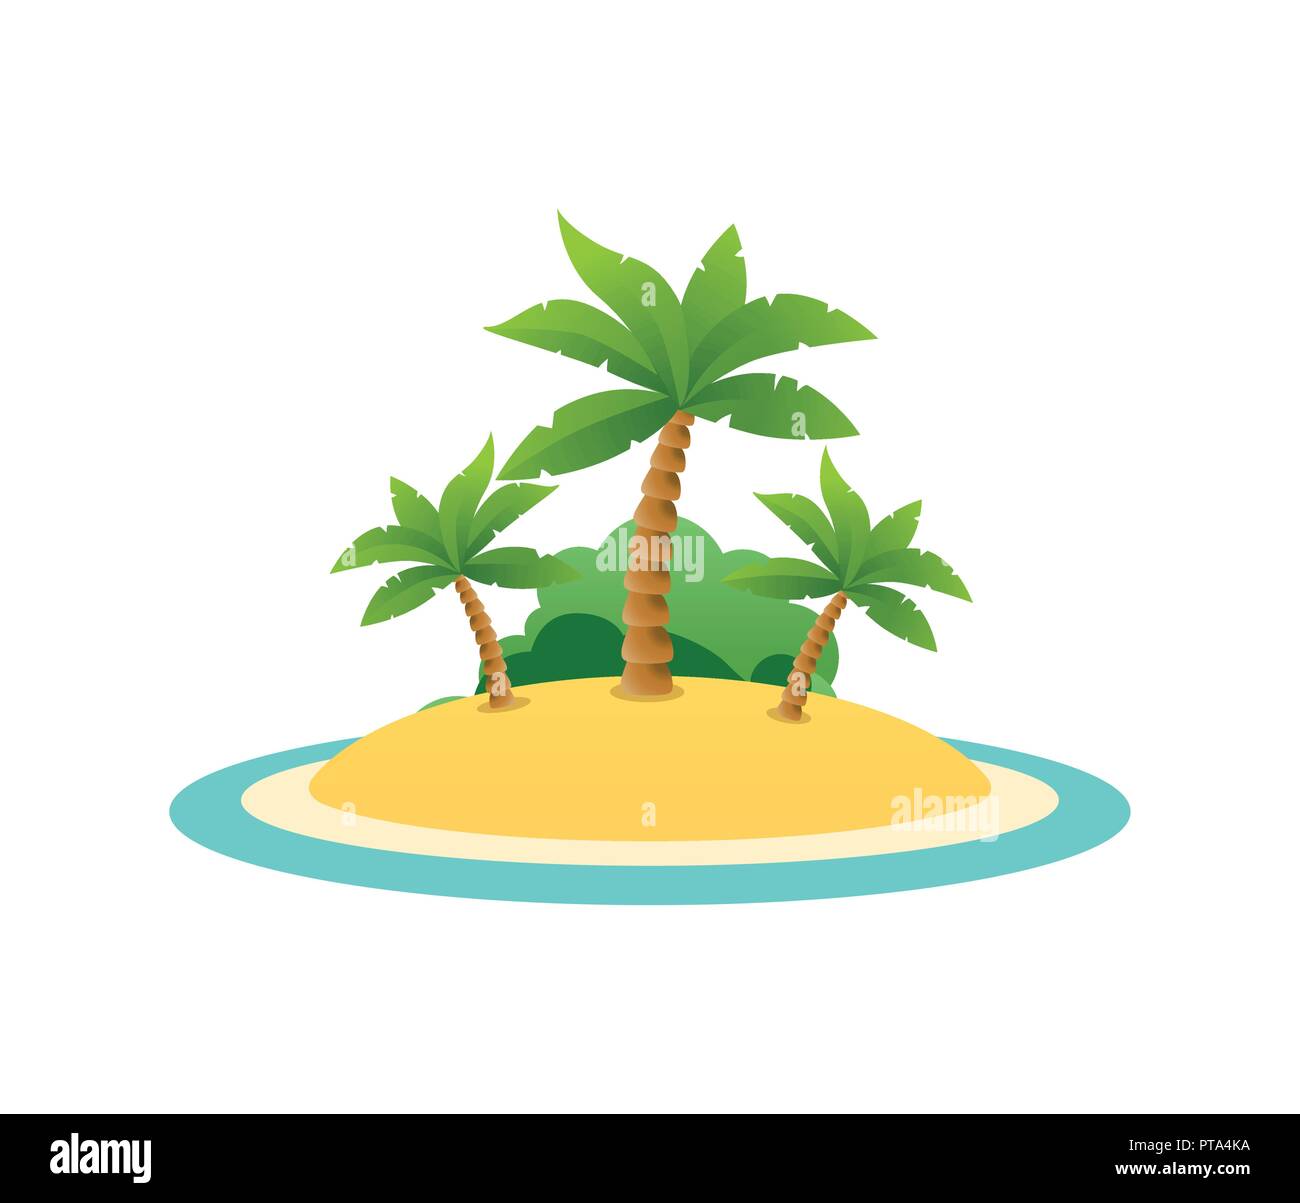 Nature Landscape of Tropic Island with Sand Beach and Palm Trees. Vector Illustration isolated on white background. Stock Vector